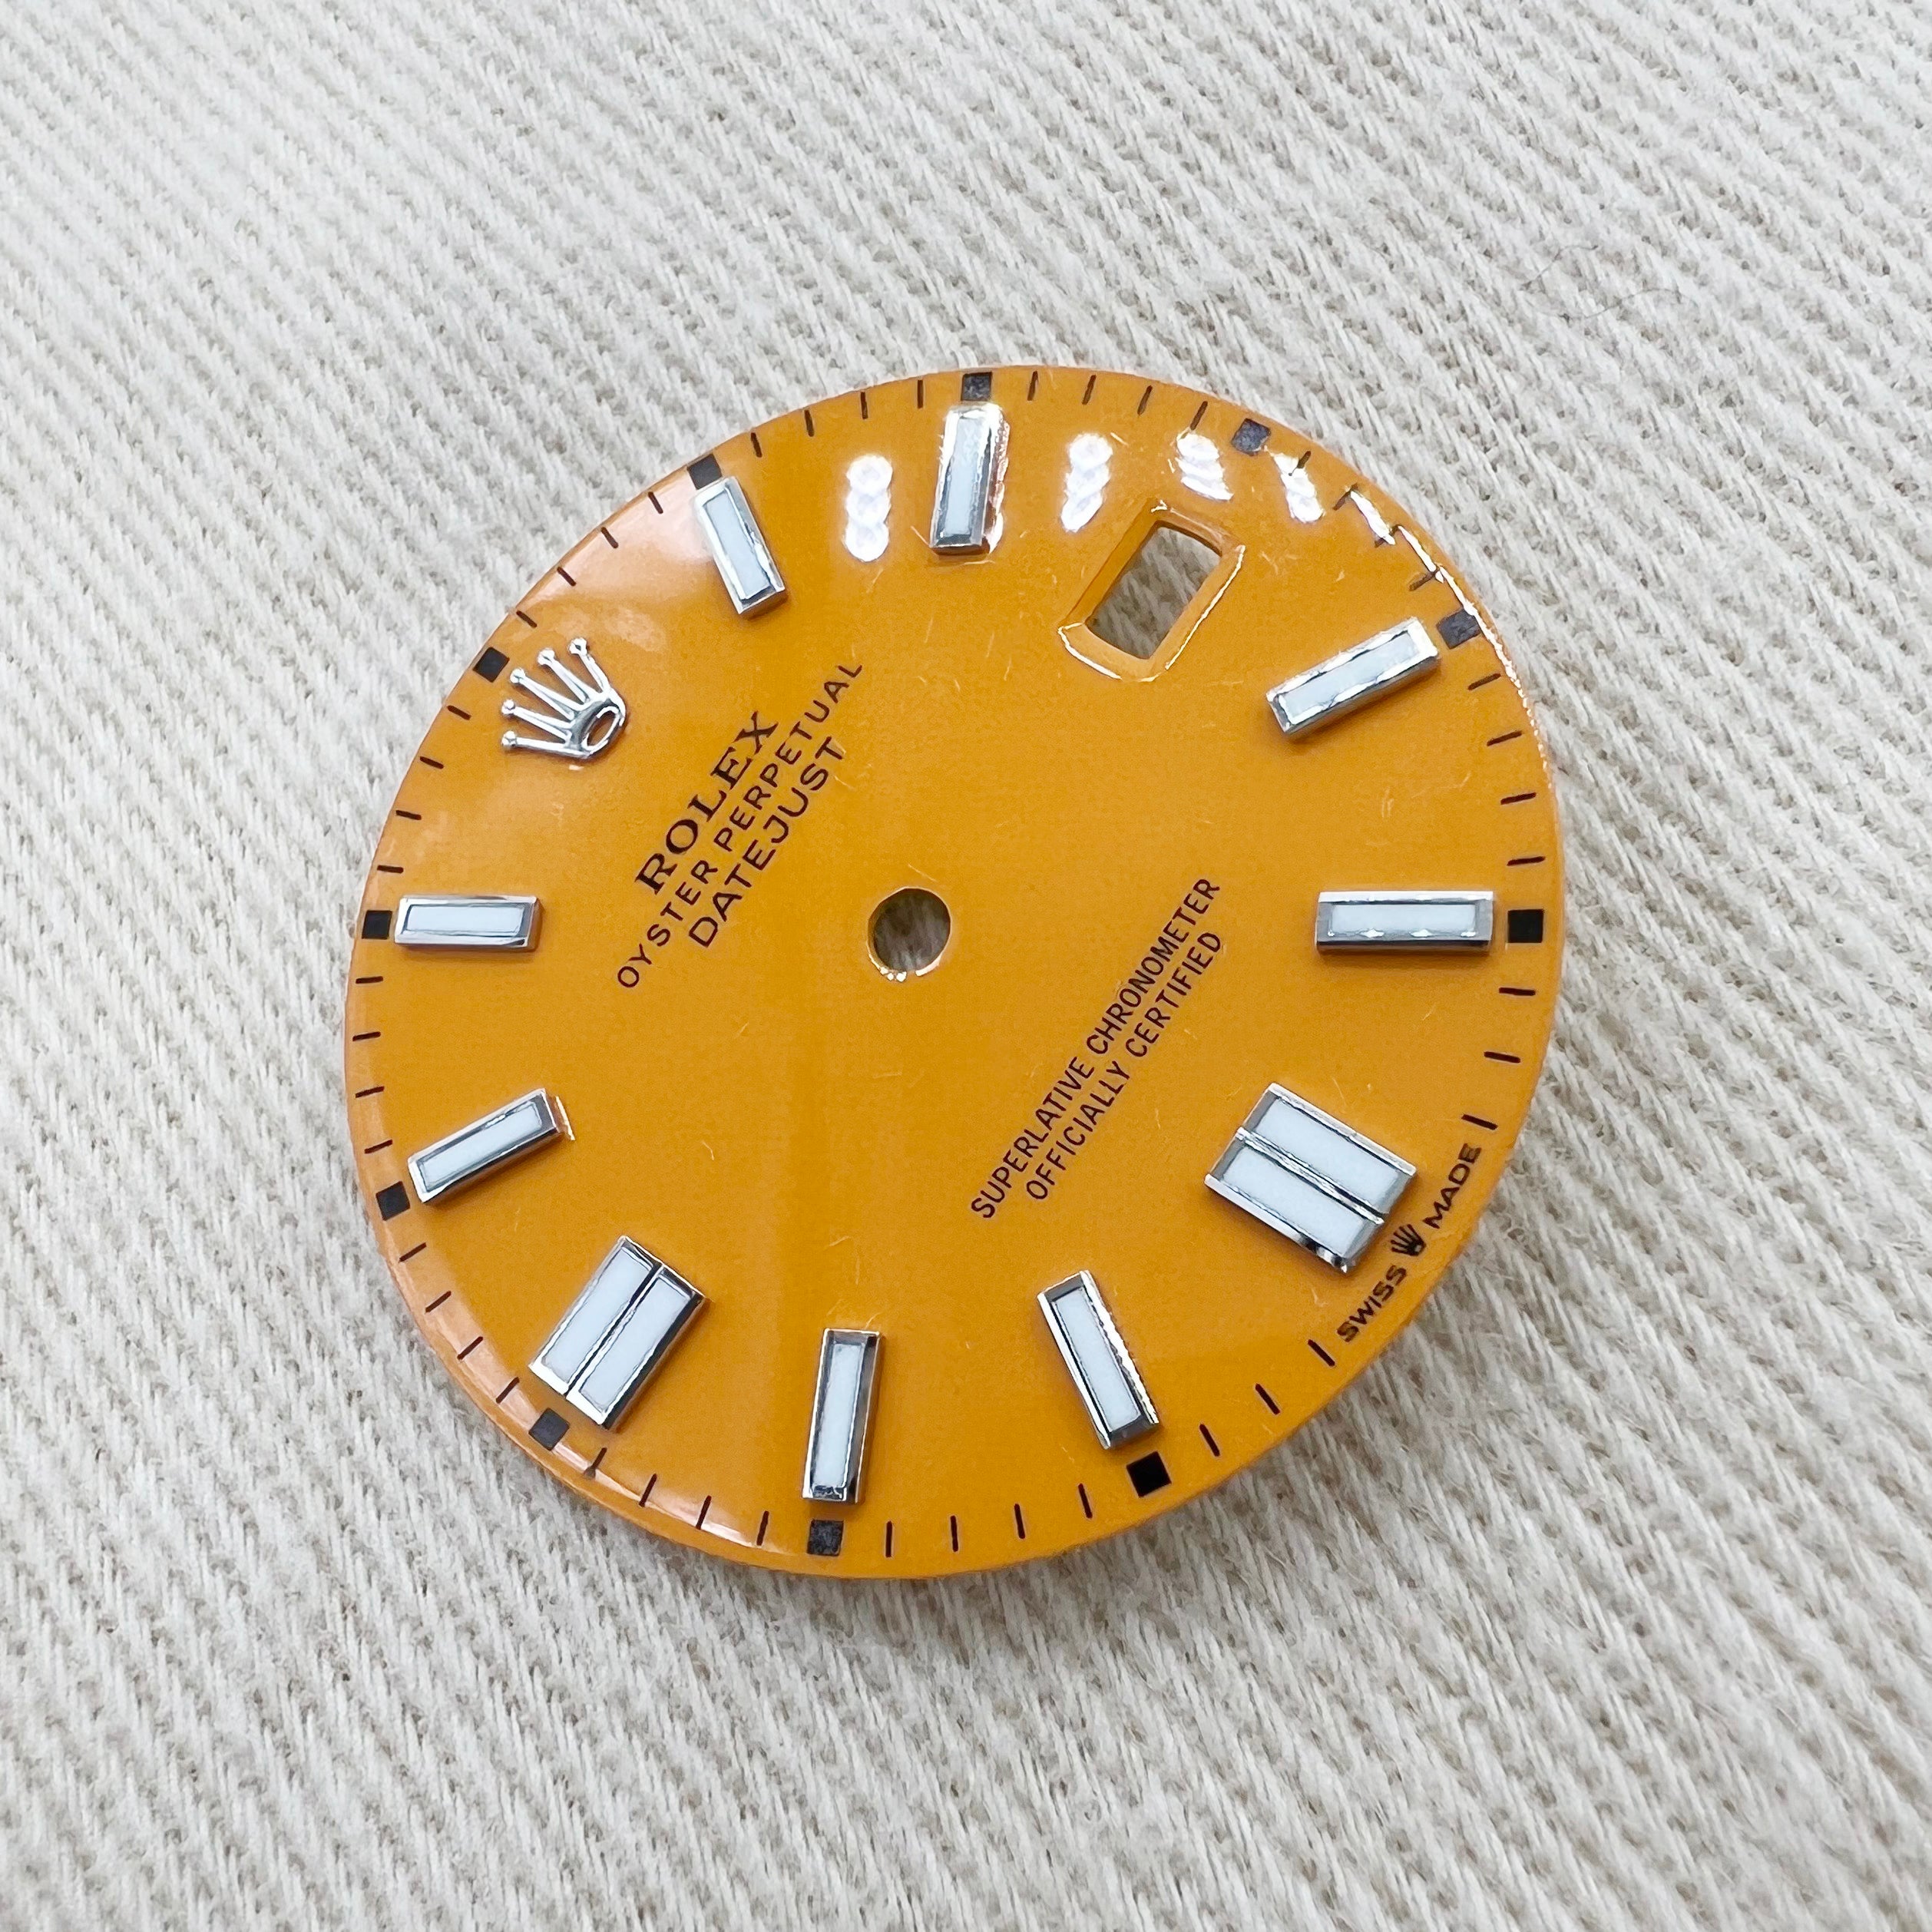 Rolex Oyster Perpetual Date Just Bright Orange Dial With Date 36mm